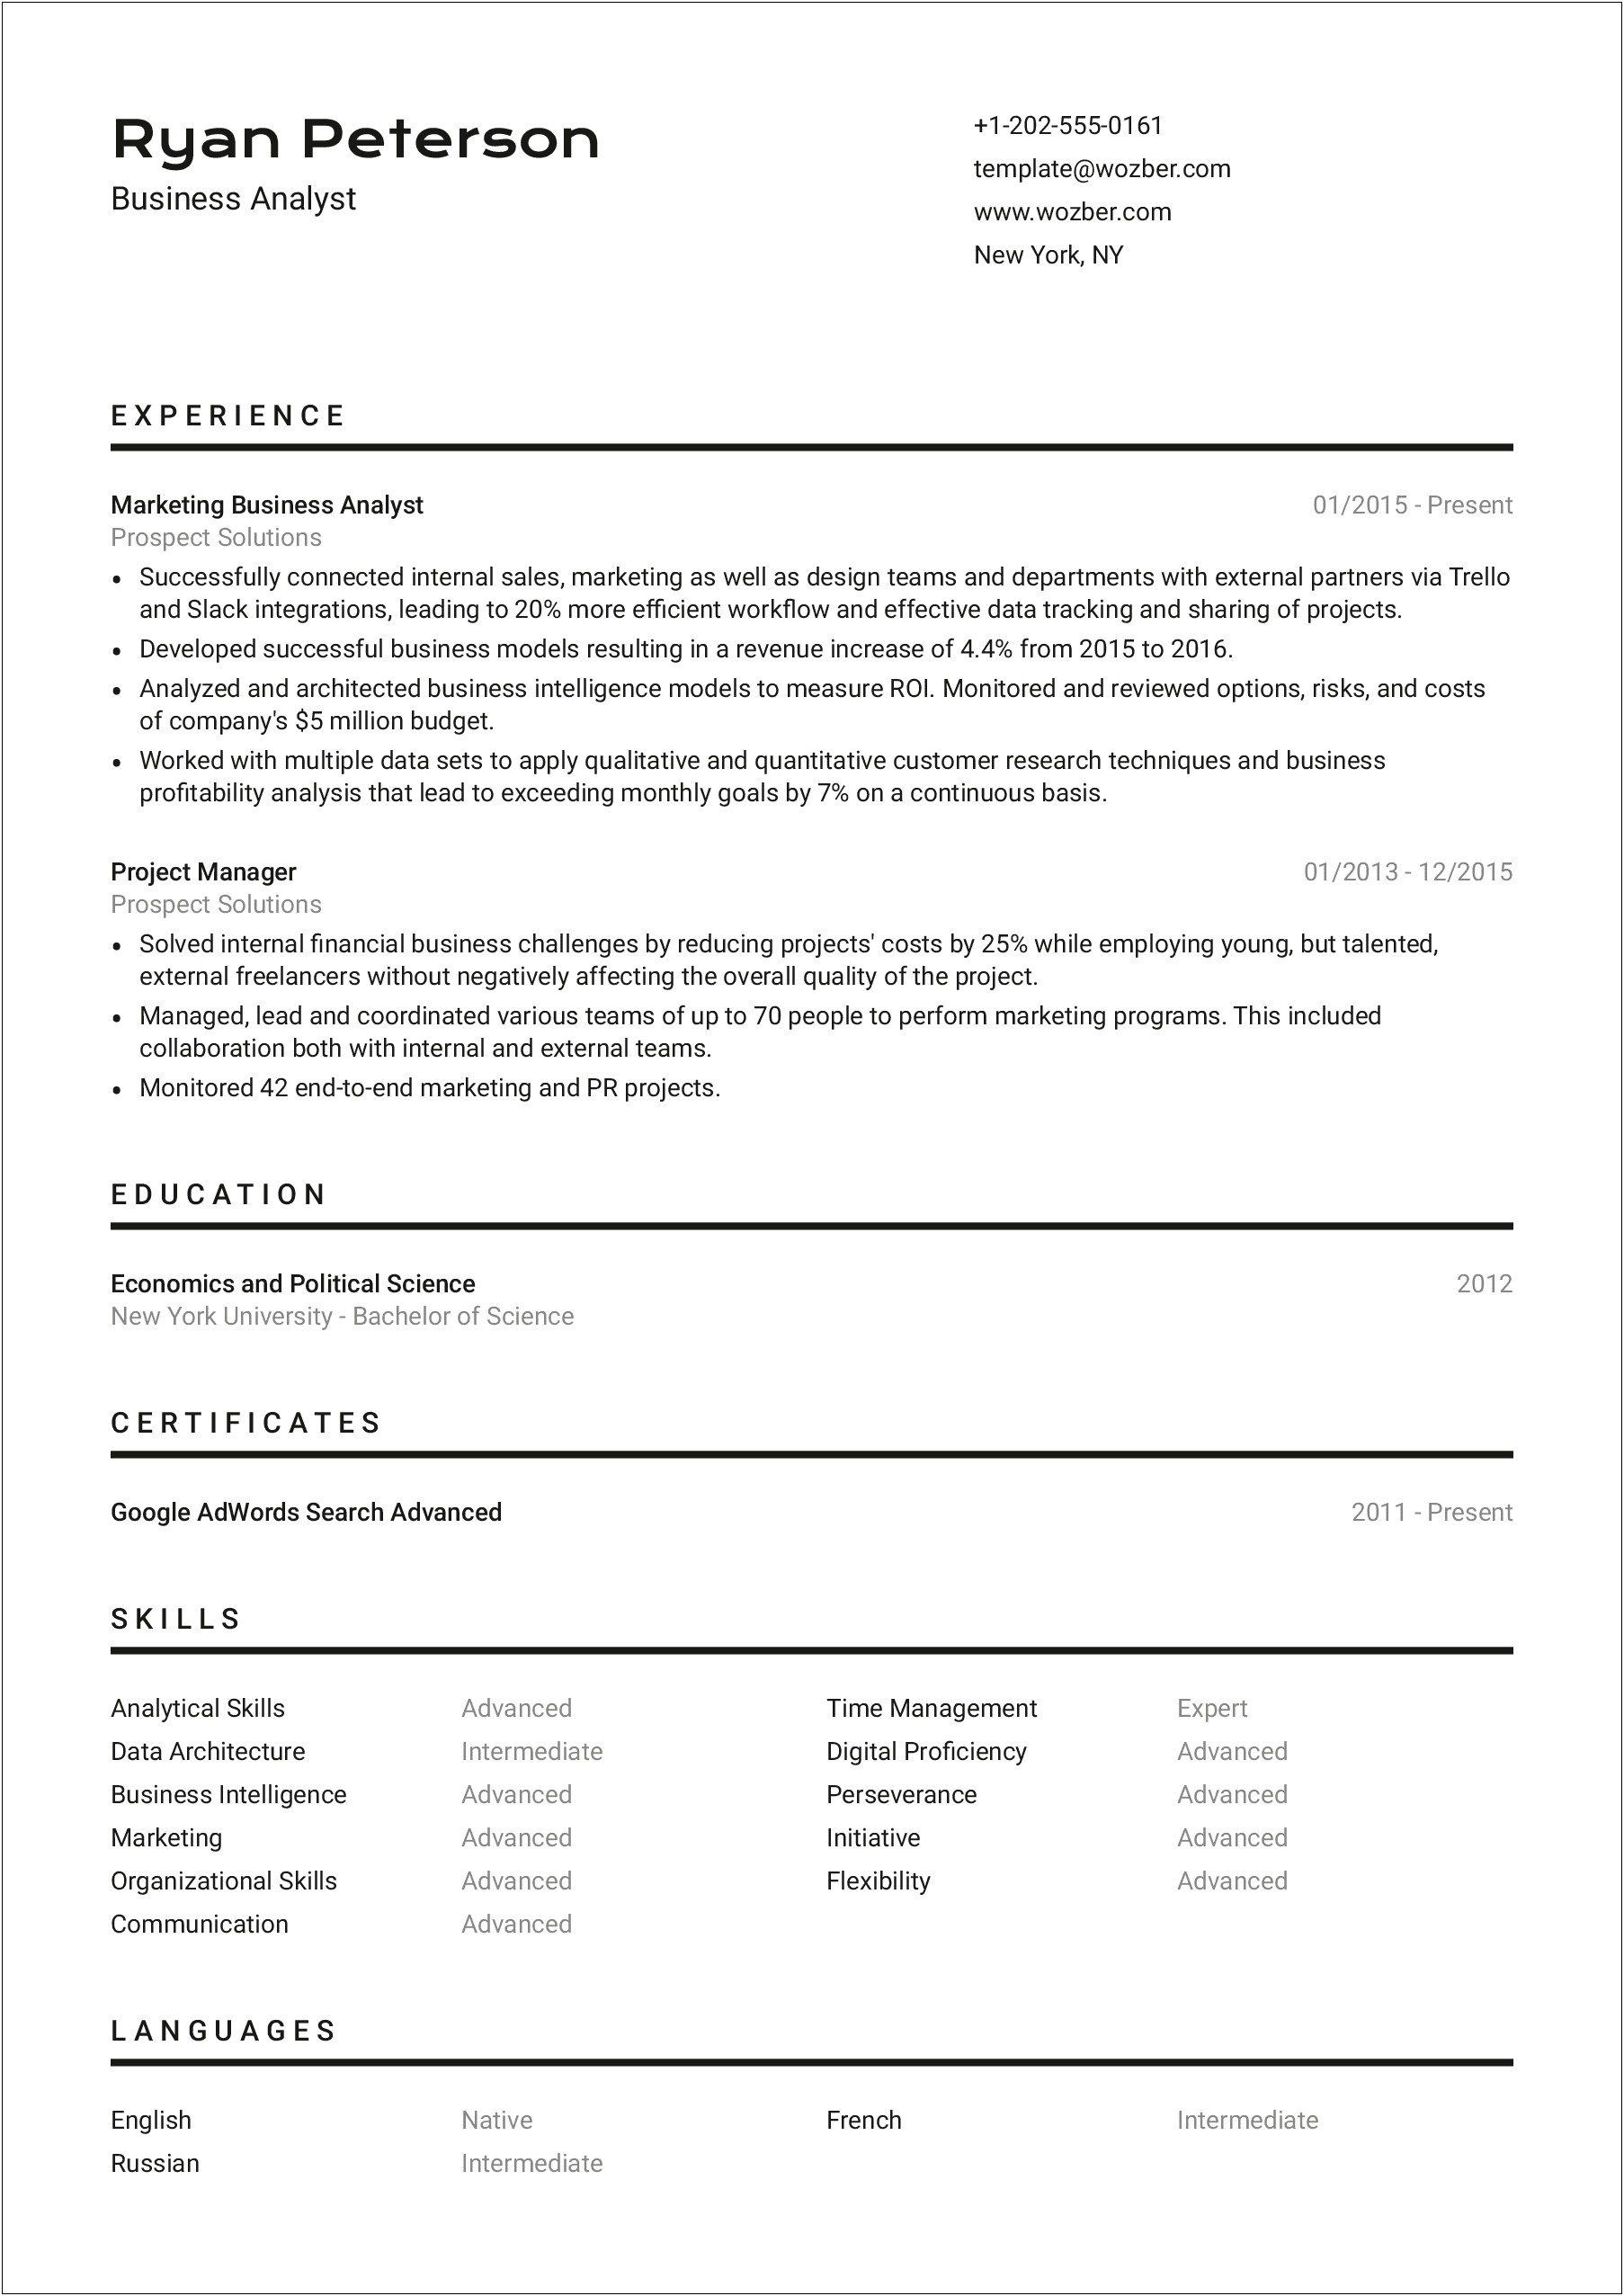 Resumes That Real Jobs Want